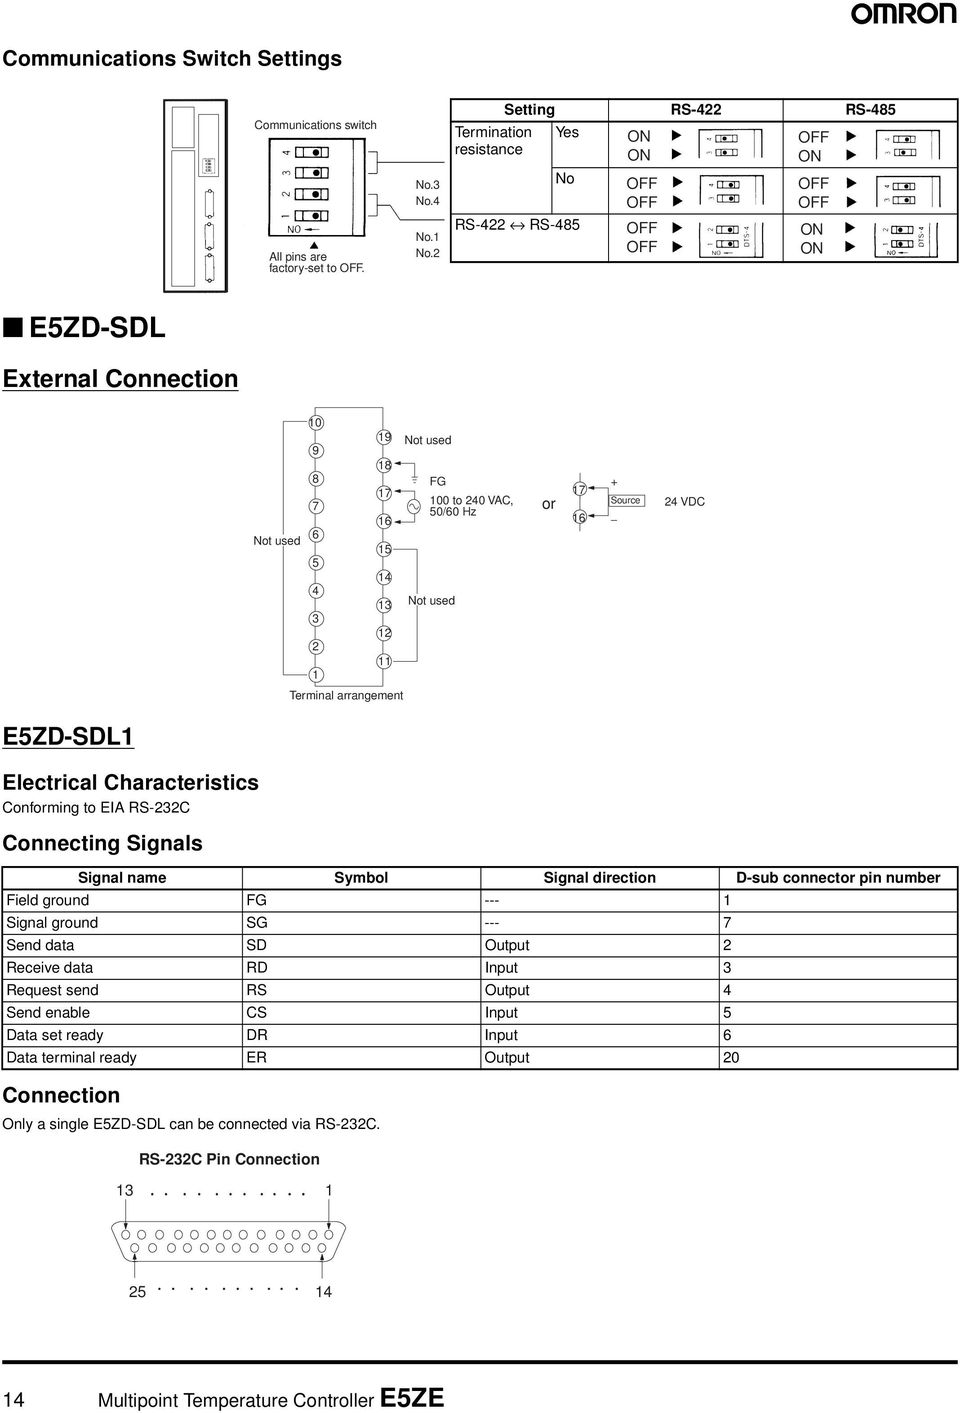 240 VAC, 50/60 Hz or 17 16 + Source 24 VDC Terminal arrangement E5ZD-SDL1 Electrical Characteristics Conforming to EIA RS-232C Connecting Signals Signal name Symbol Signal direction D-sub connector